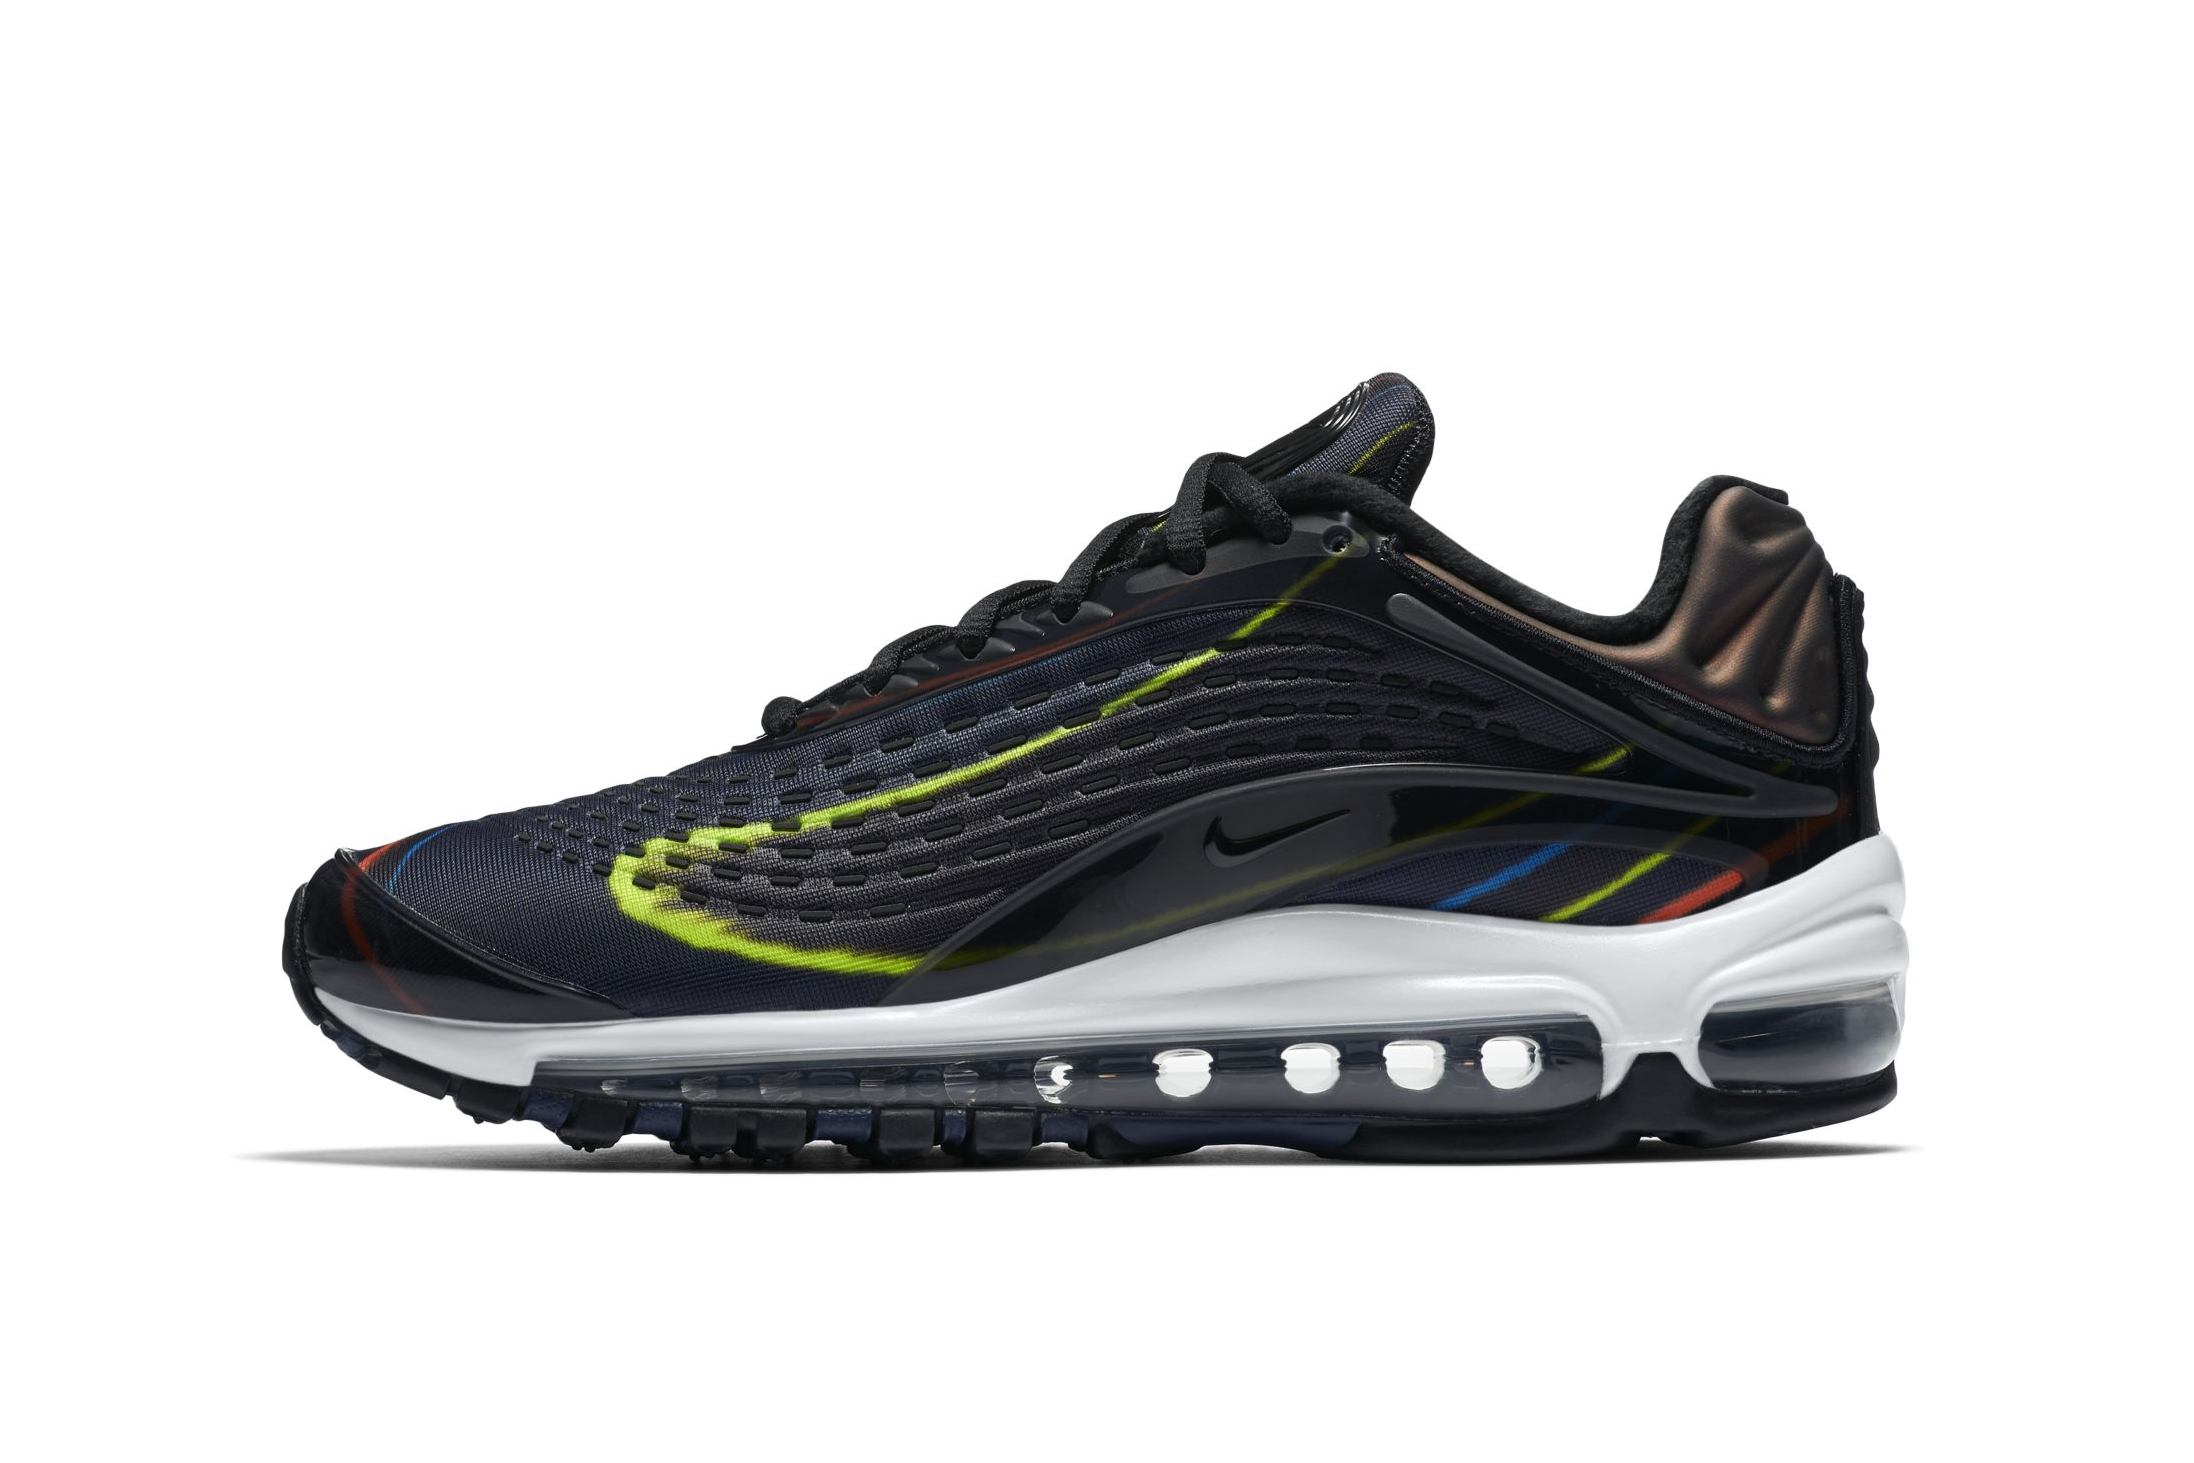 Nike Air Max Deluxe "Black/Midnight Navy/Silver" release date first look sneaker mens womens colorway price purchase retro trainer multicolor